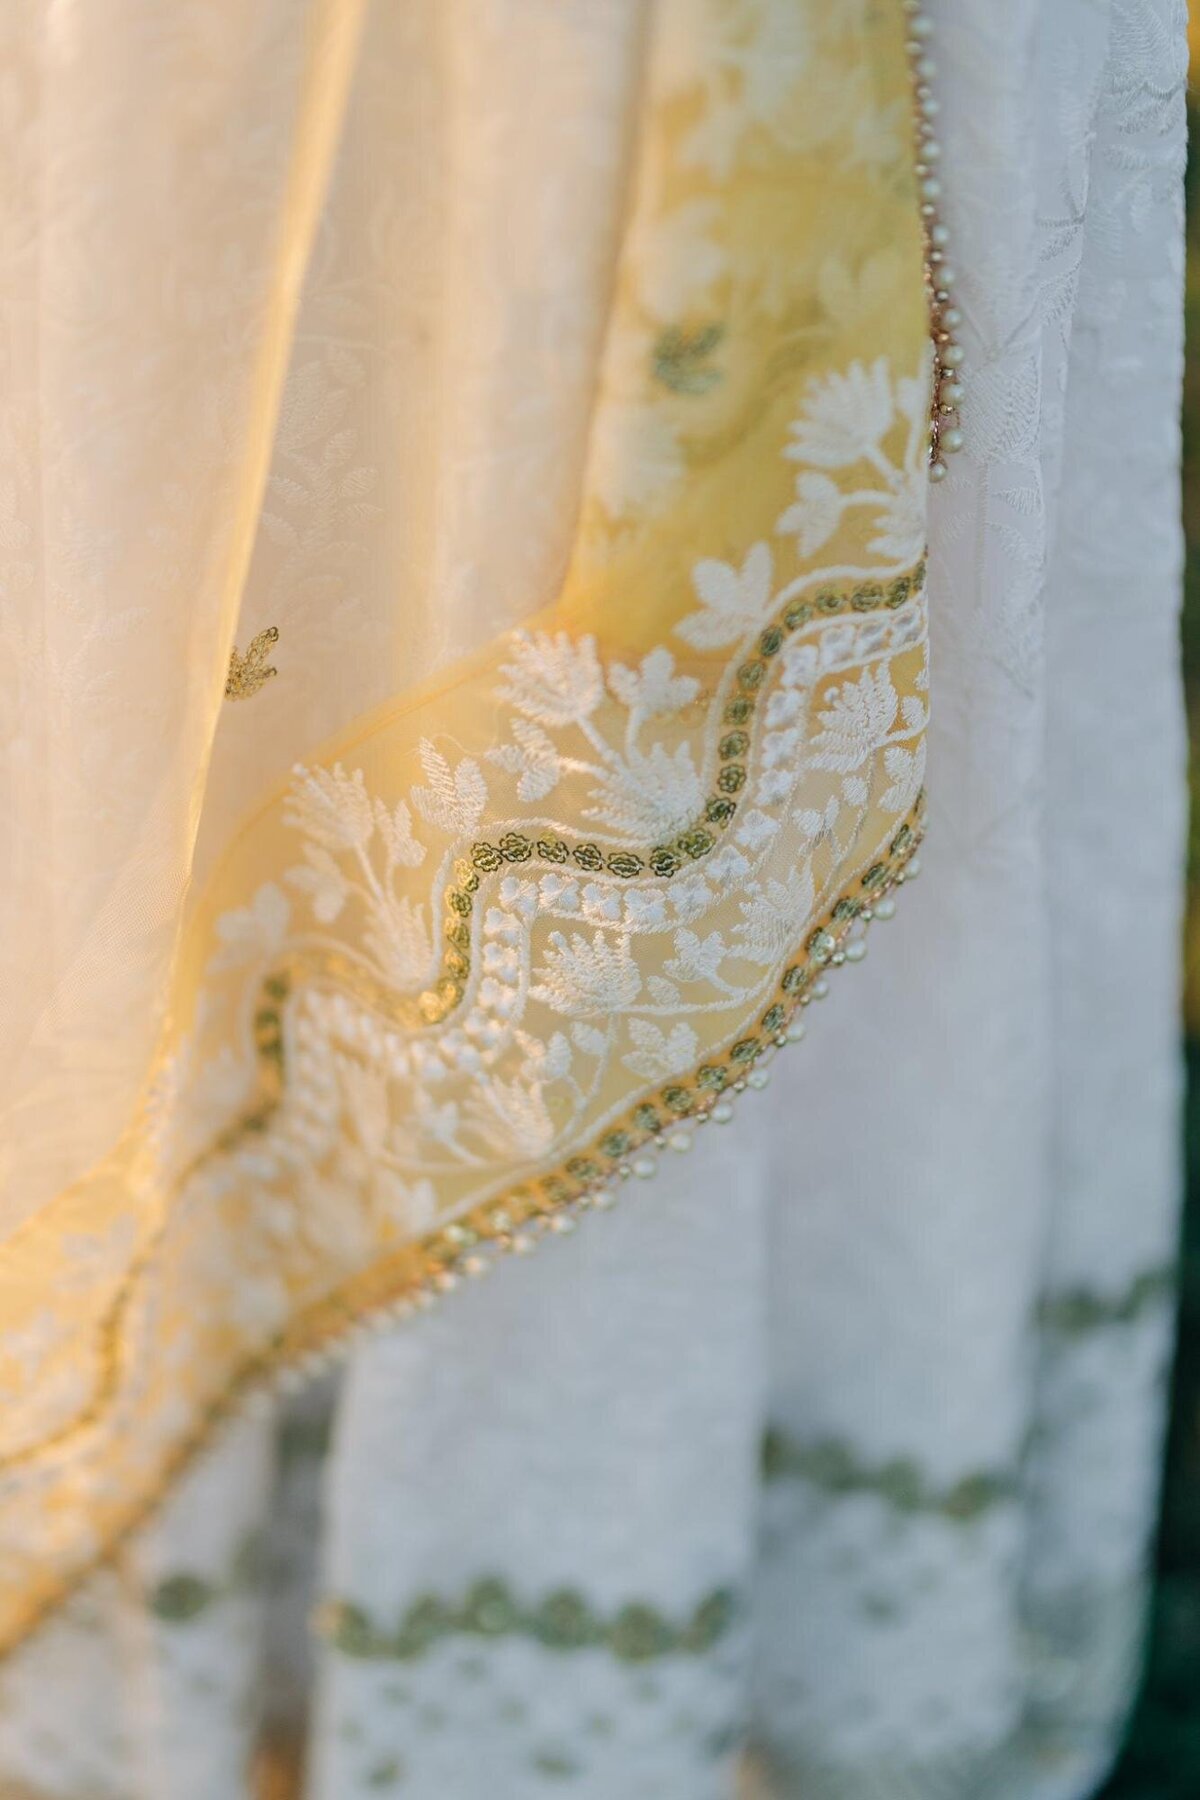 Close-up of a delicate white and gold embroidered fabric with intricate beadwork, highlighted by soft sunlight.